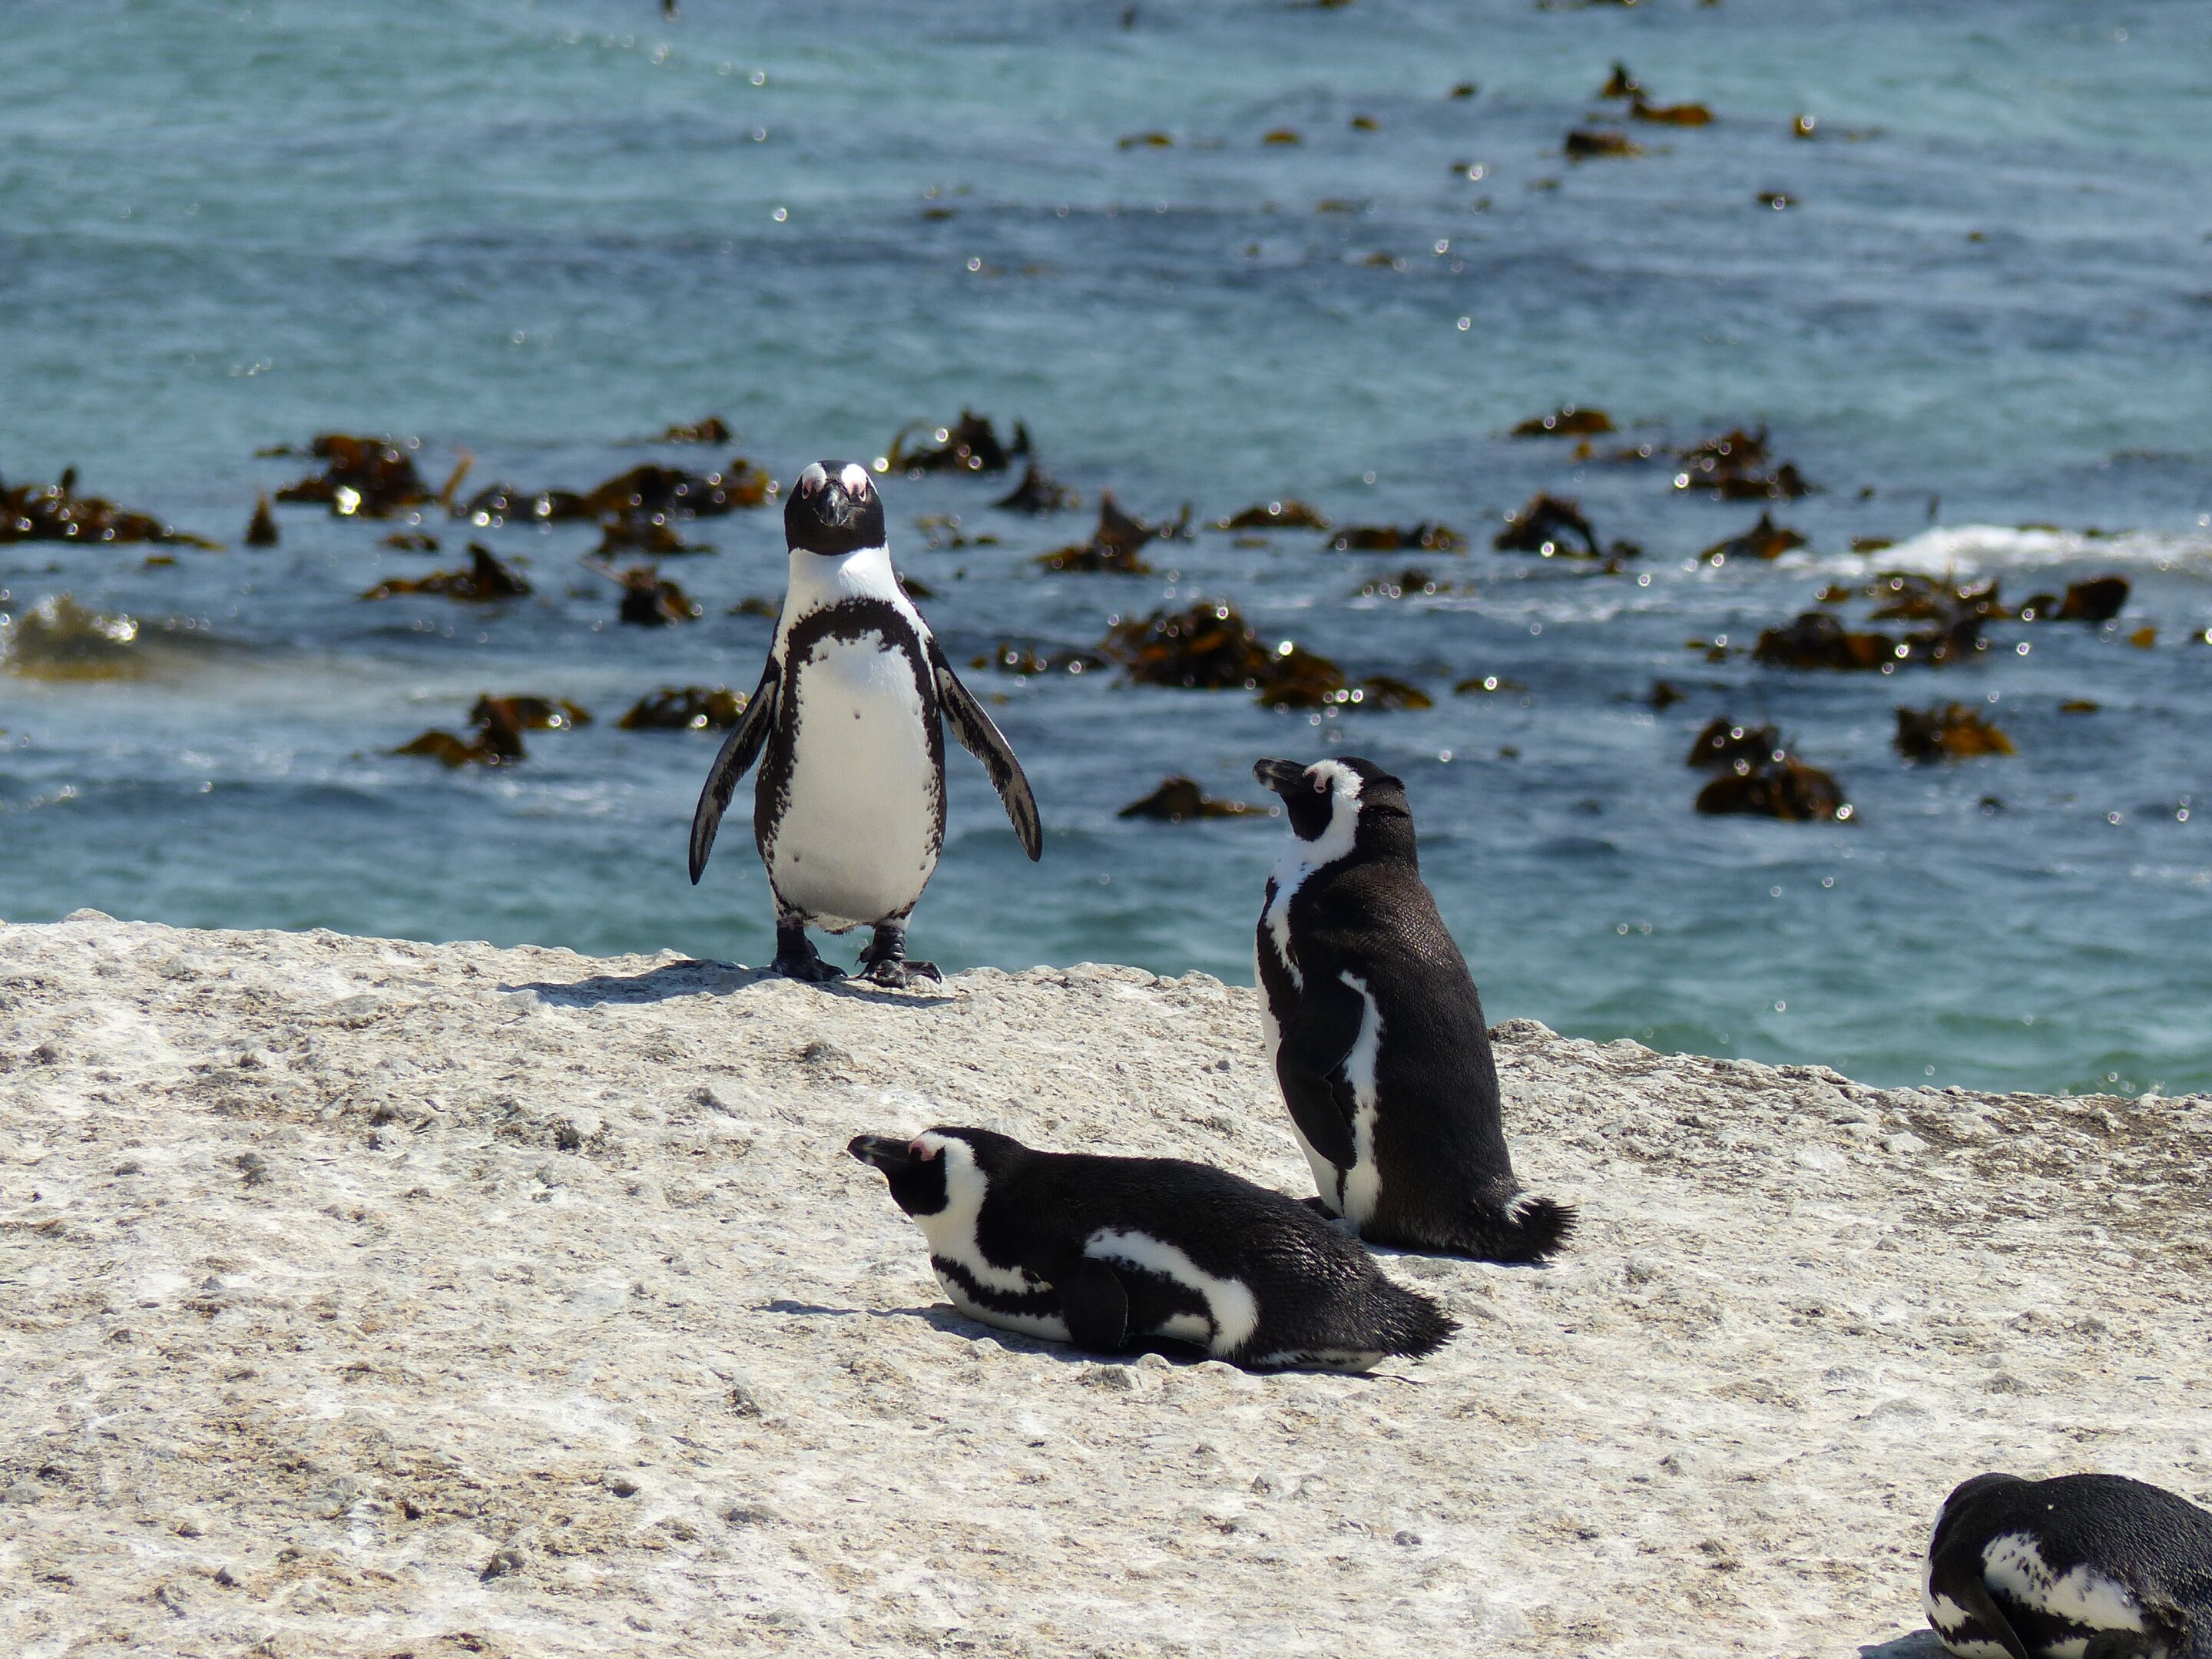 Vocal accommodation found in African penguins